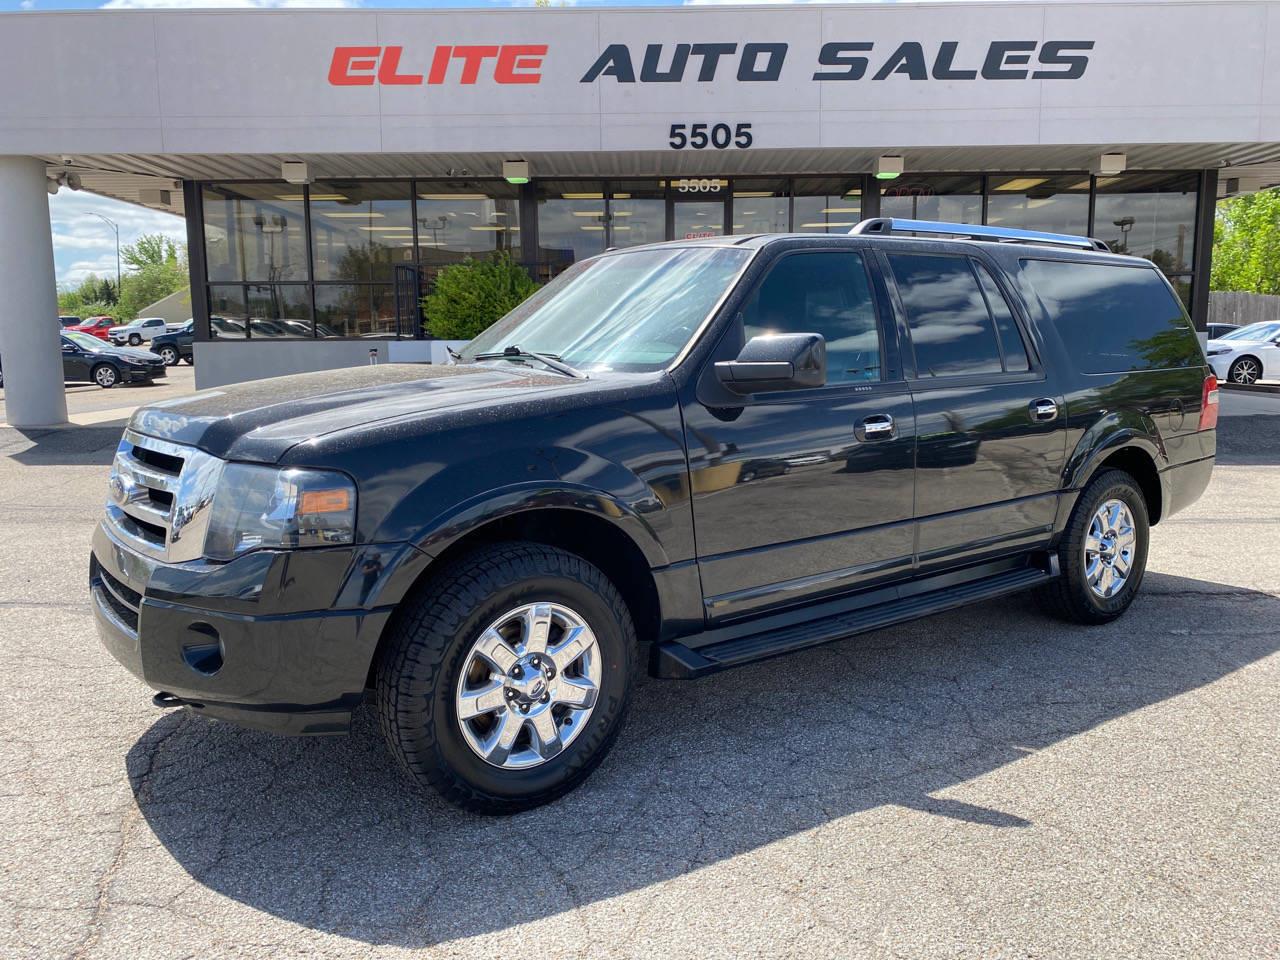 2014 Ford Expedition EL Limited